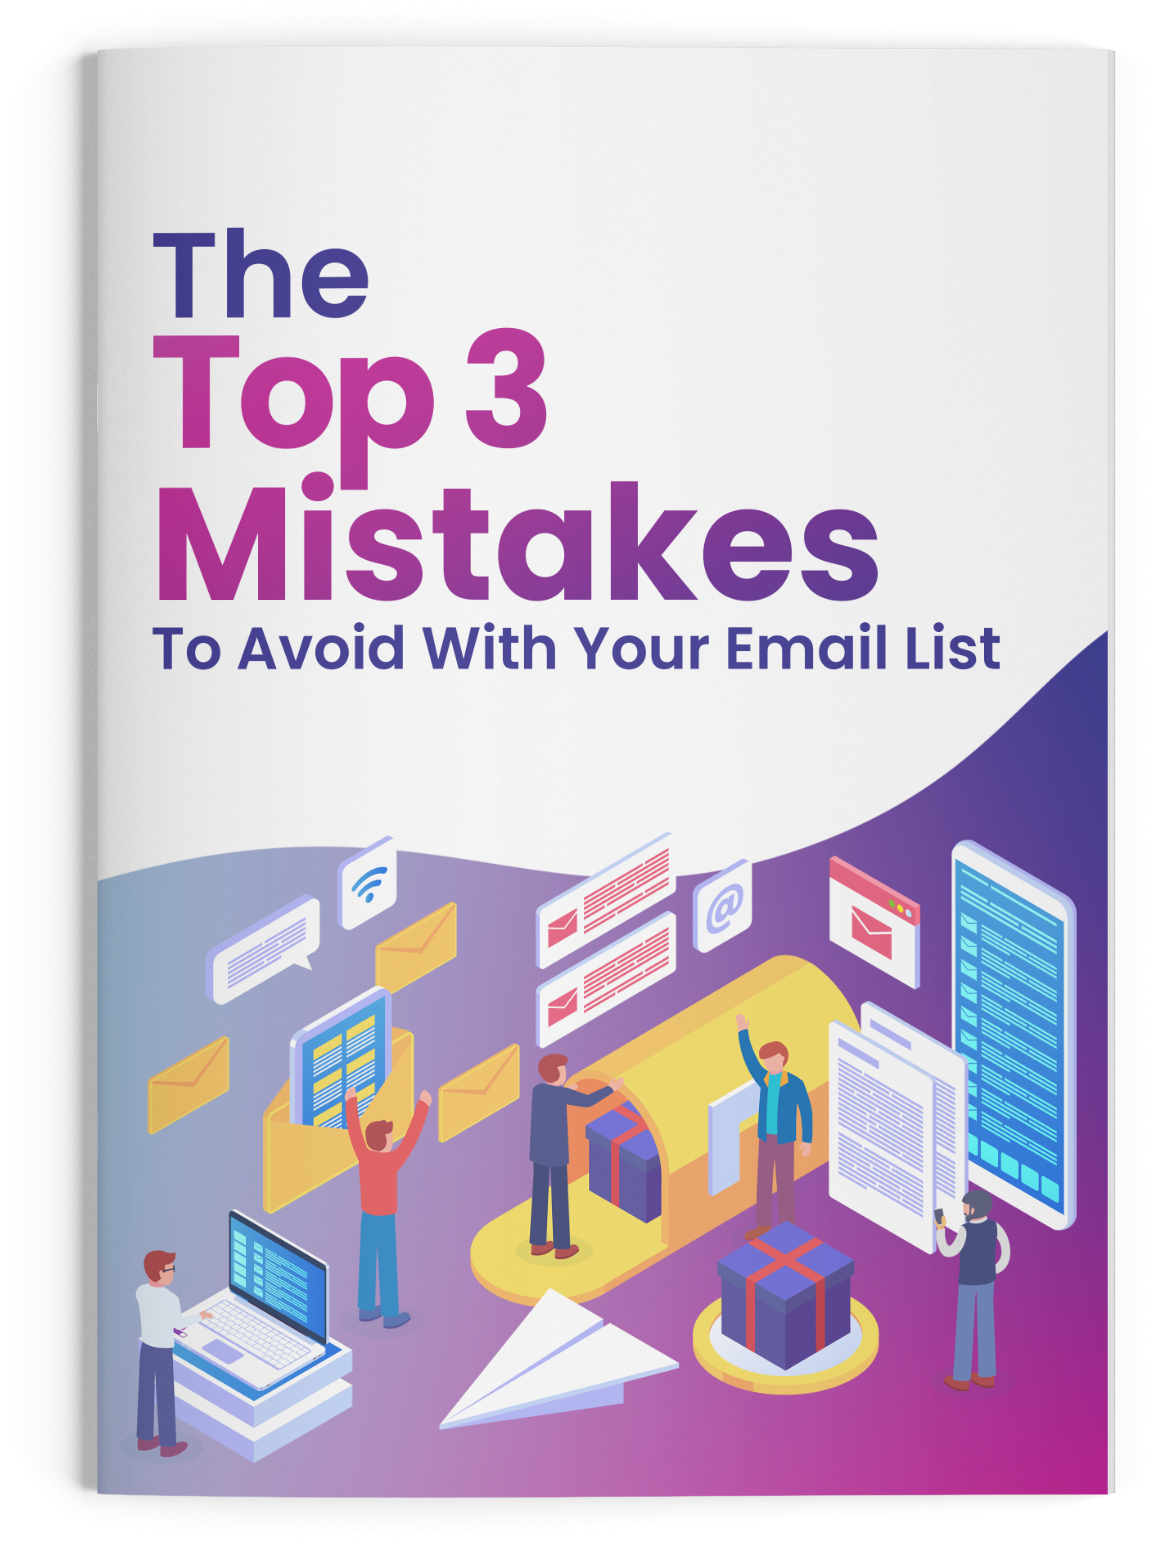 The Top 3 Mistakes To Avoid With Your Email List